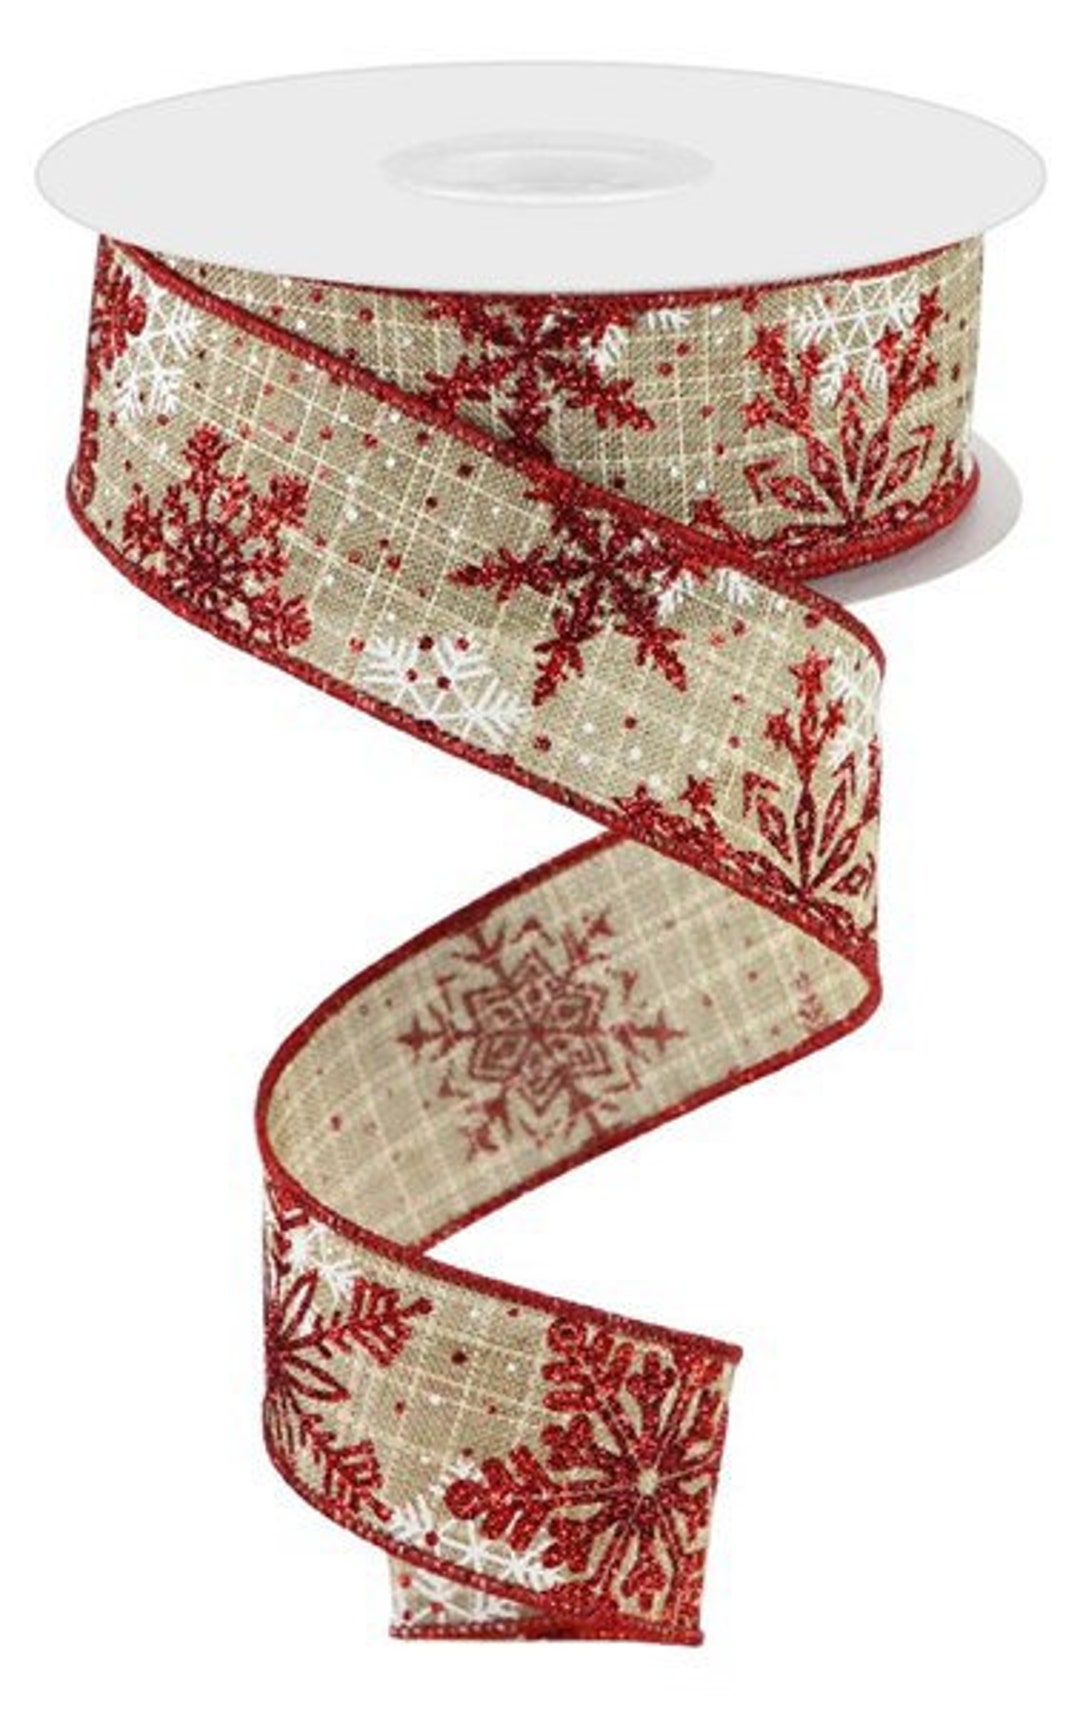 1.5 Glitter Snowflakes Ribbon: Red & White (10 Yards)